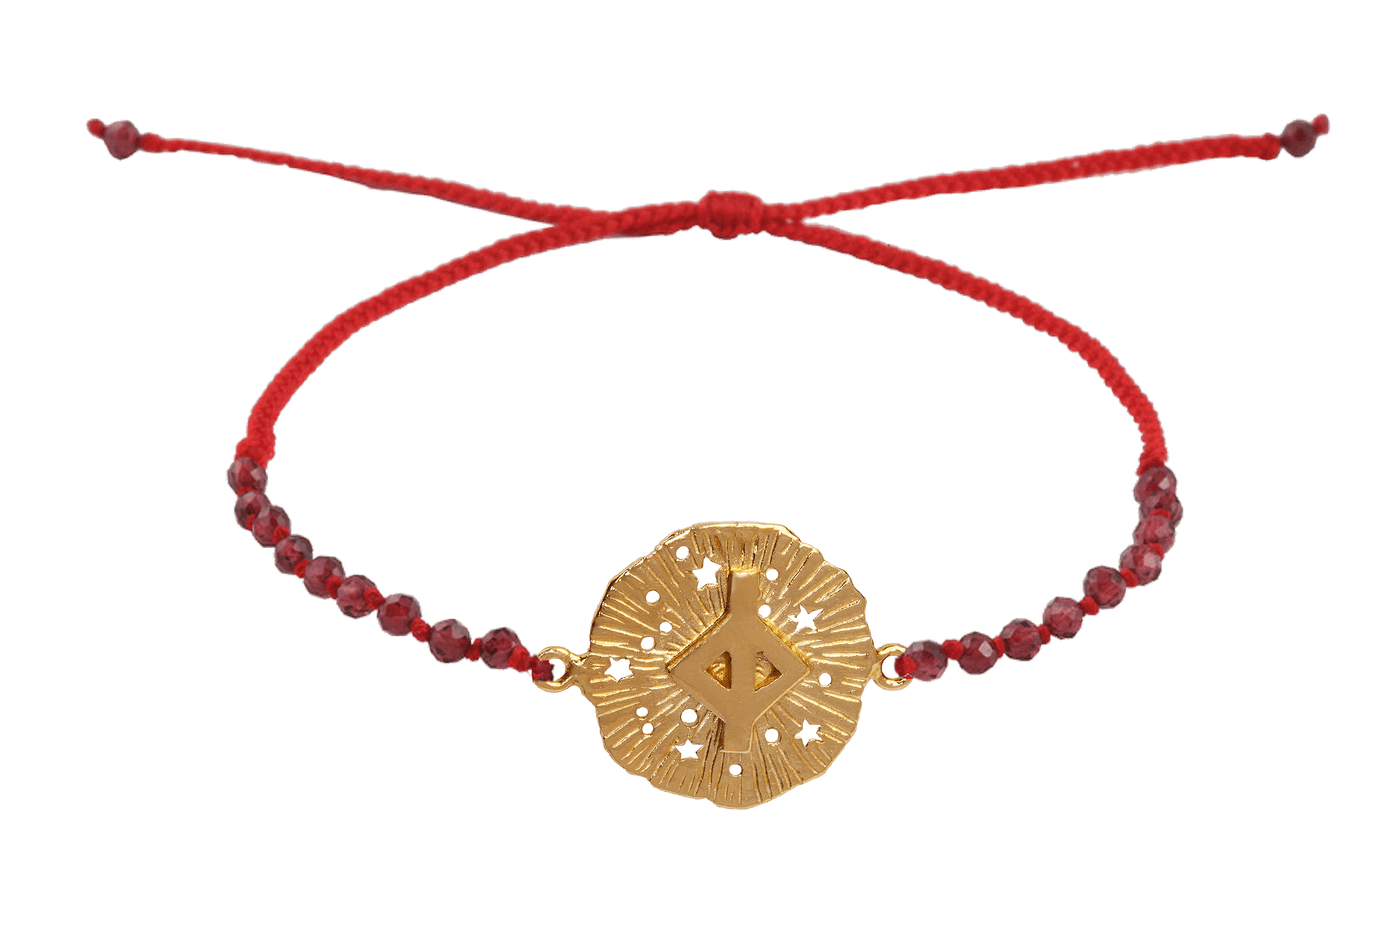 Runic medallion amulet Jera bracelet with beads. Gold plated